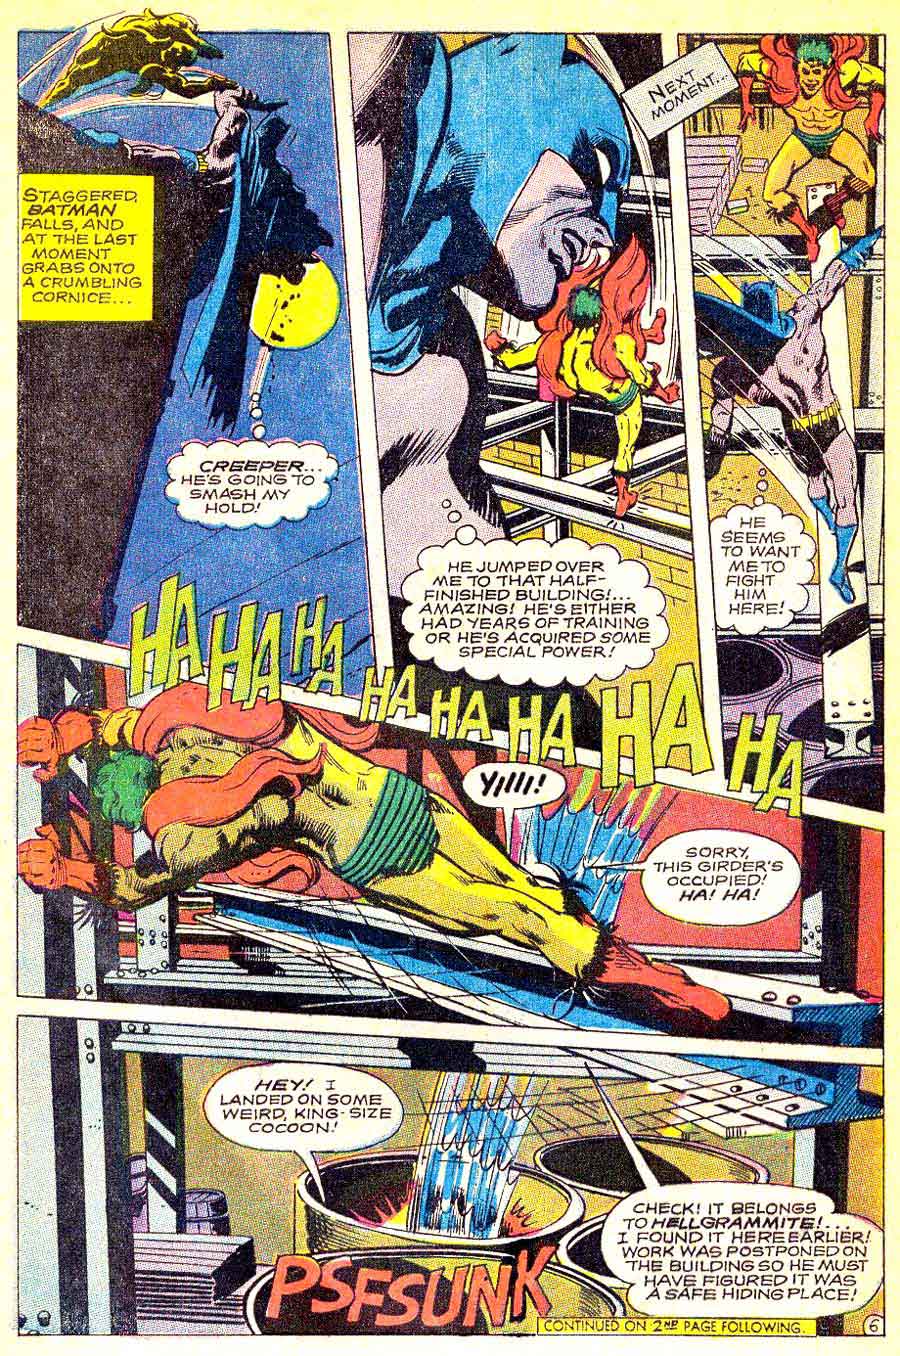 Neal Adams dc silver age 1960s comic book page art - Brave and the Bold #80